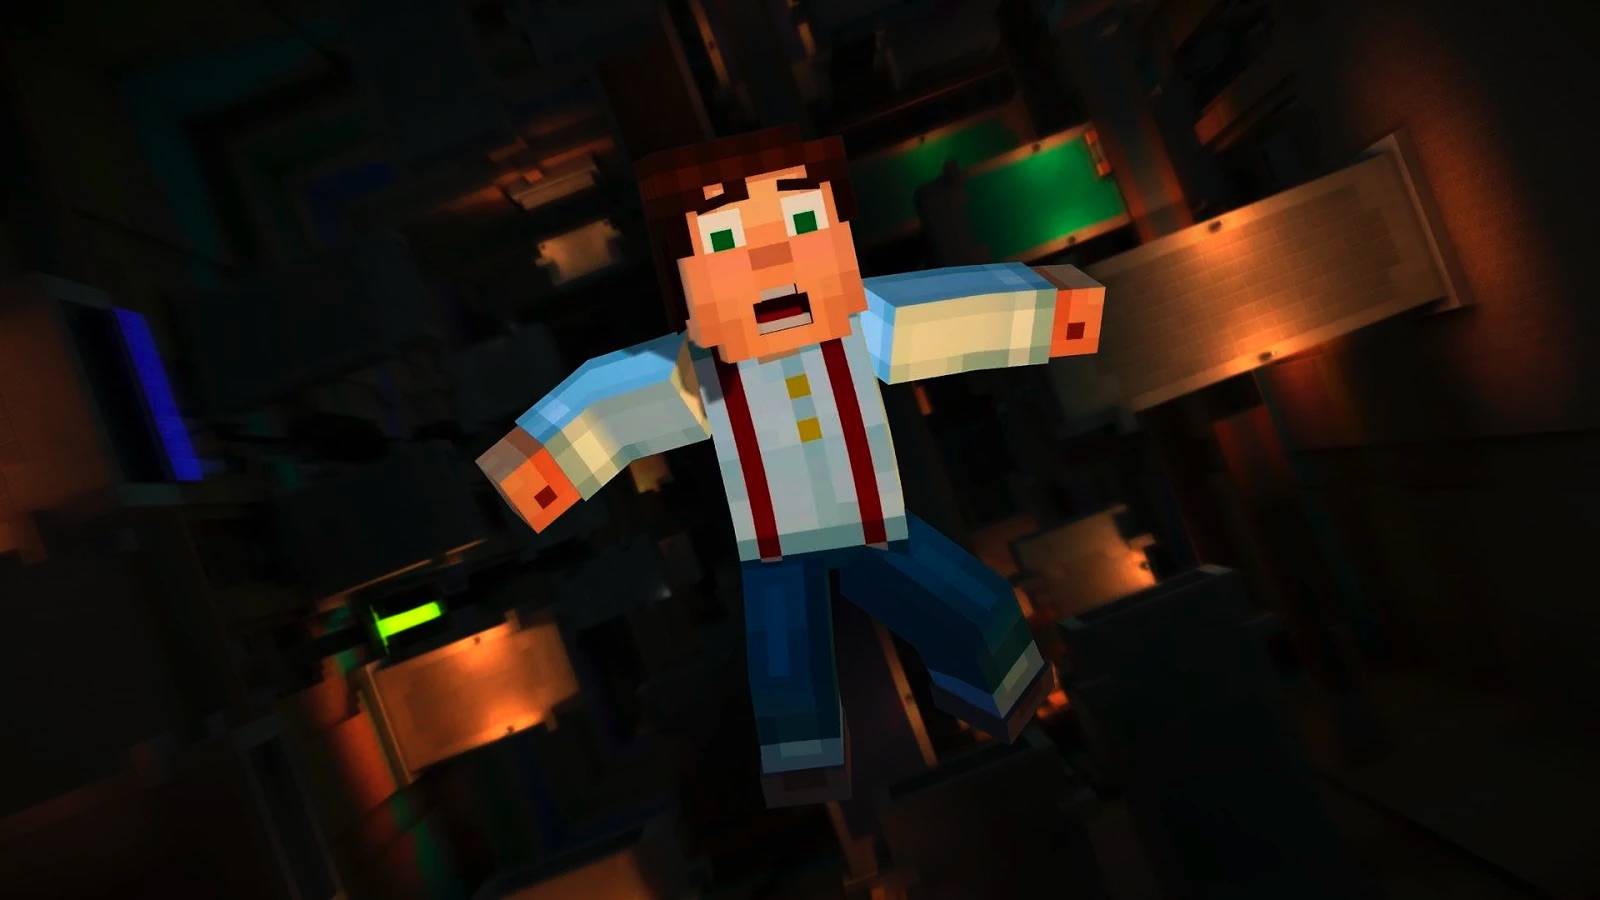 Minecraft: Story Mode Episode 7' released and ready with new adventures -  Android Community